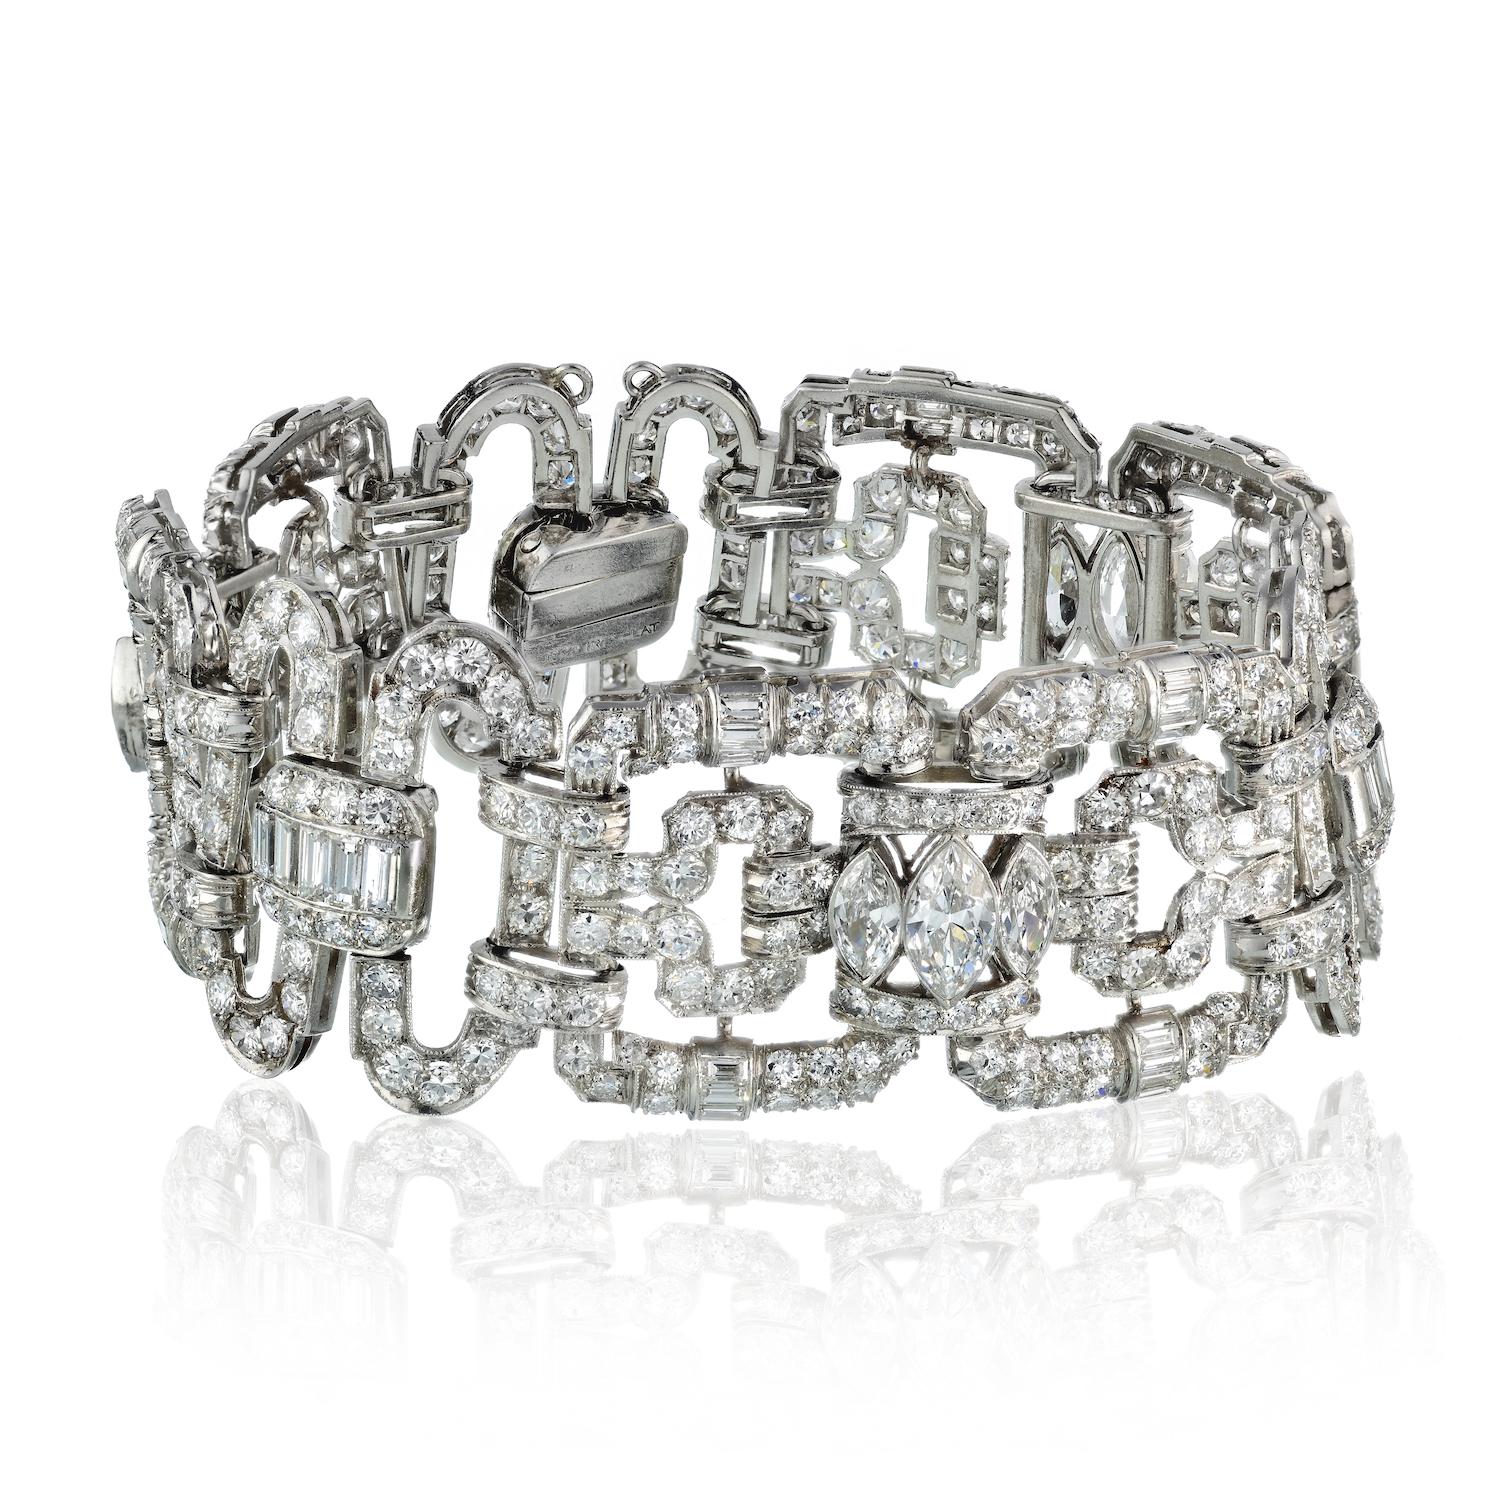 Elegance meets drama in this captivating heirloom bracelet, a true masterpiece of artful design. 

Embellished with a staggering 28.00 carats of multi-shaped diamonds, each stone showcases the impeccable qualities of F/G color and VS clarity. 

The